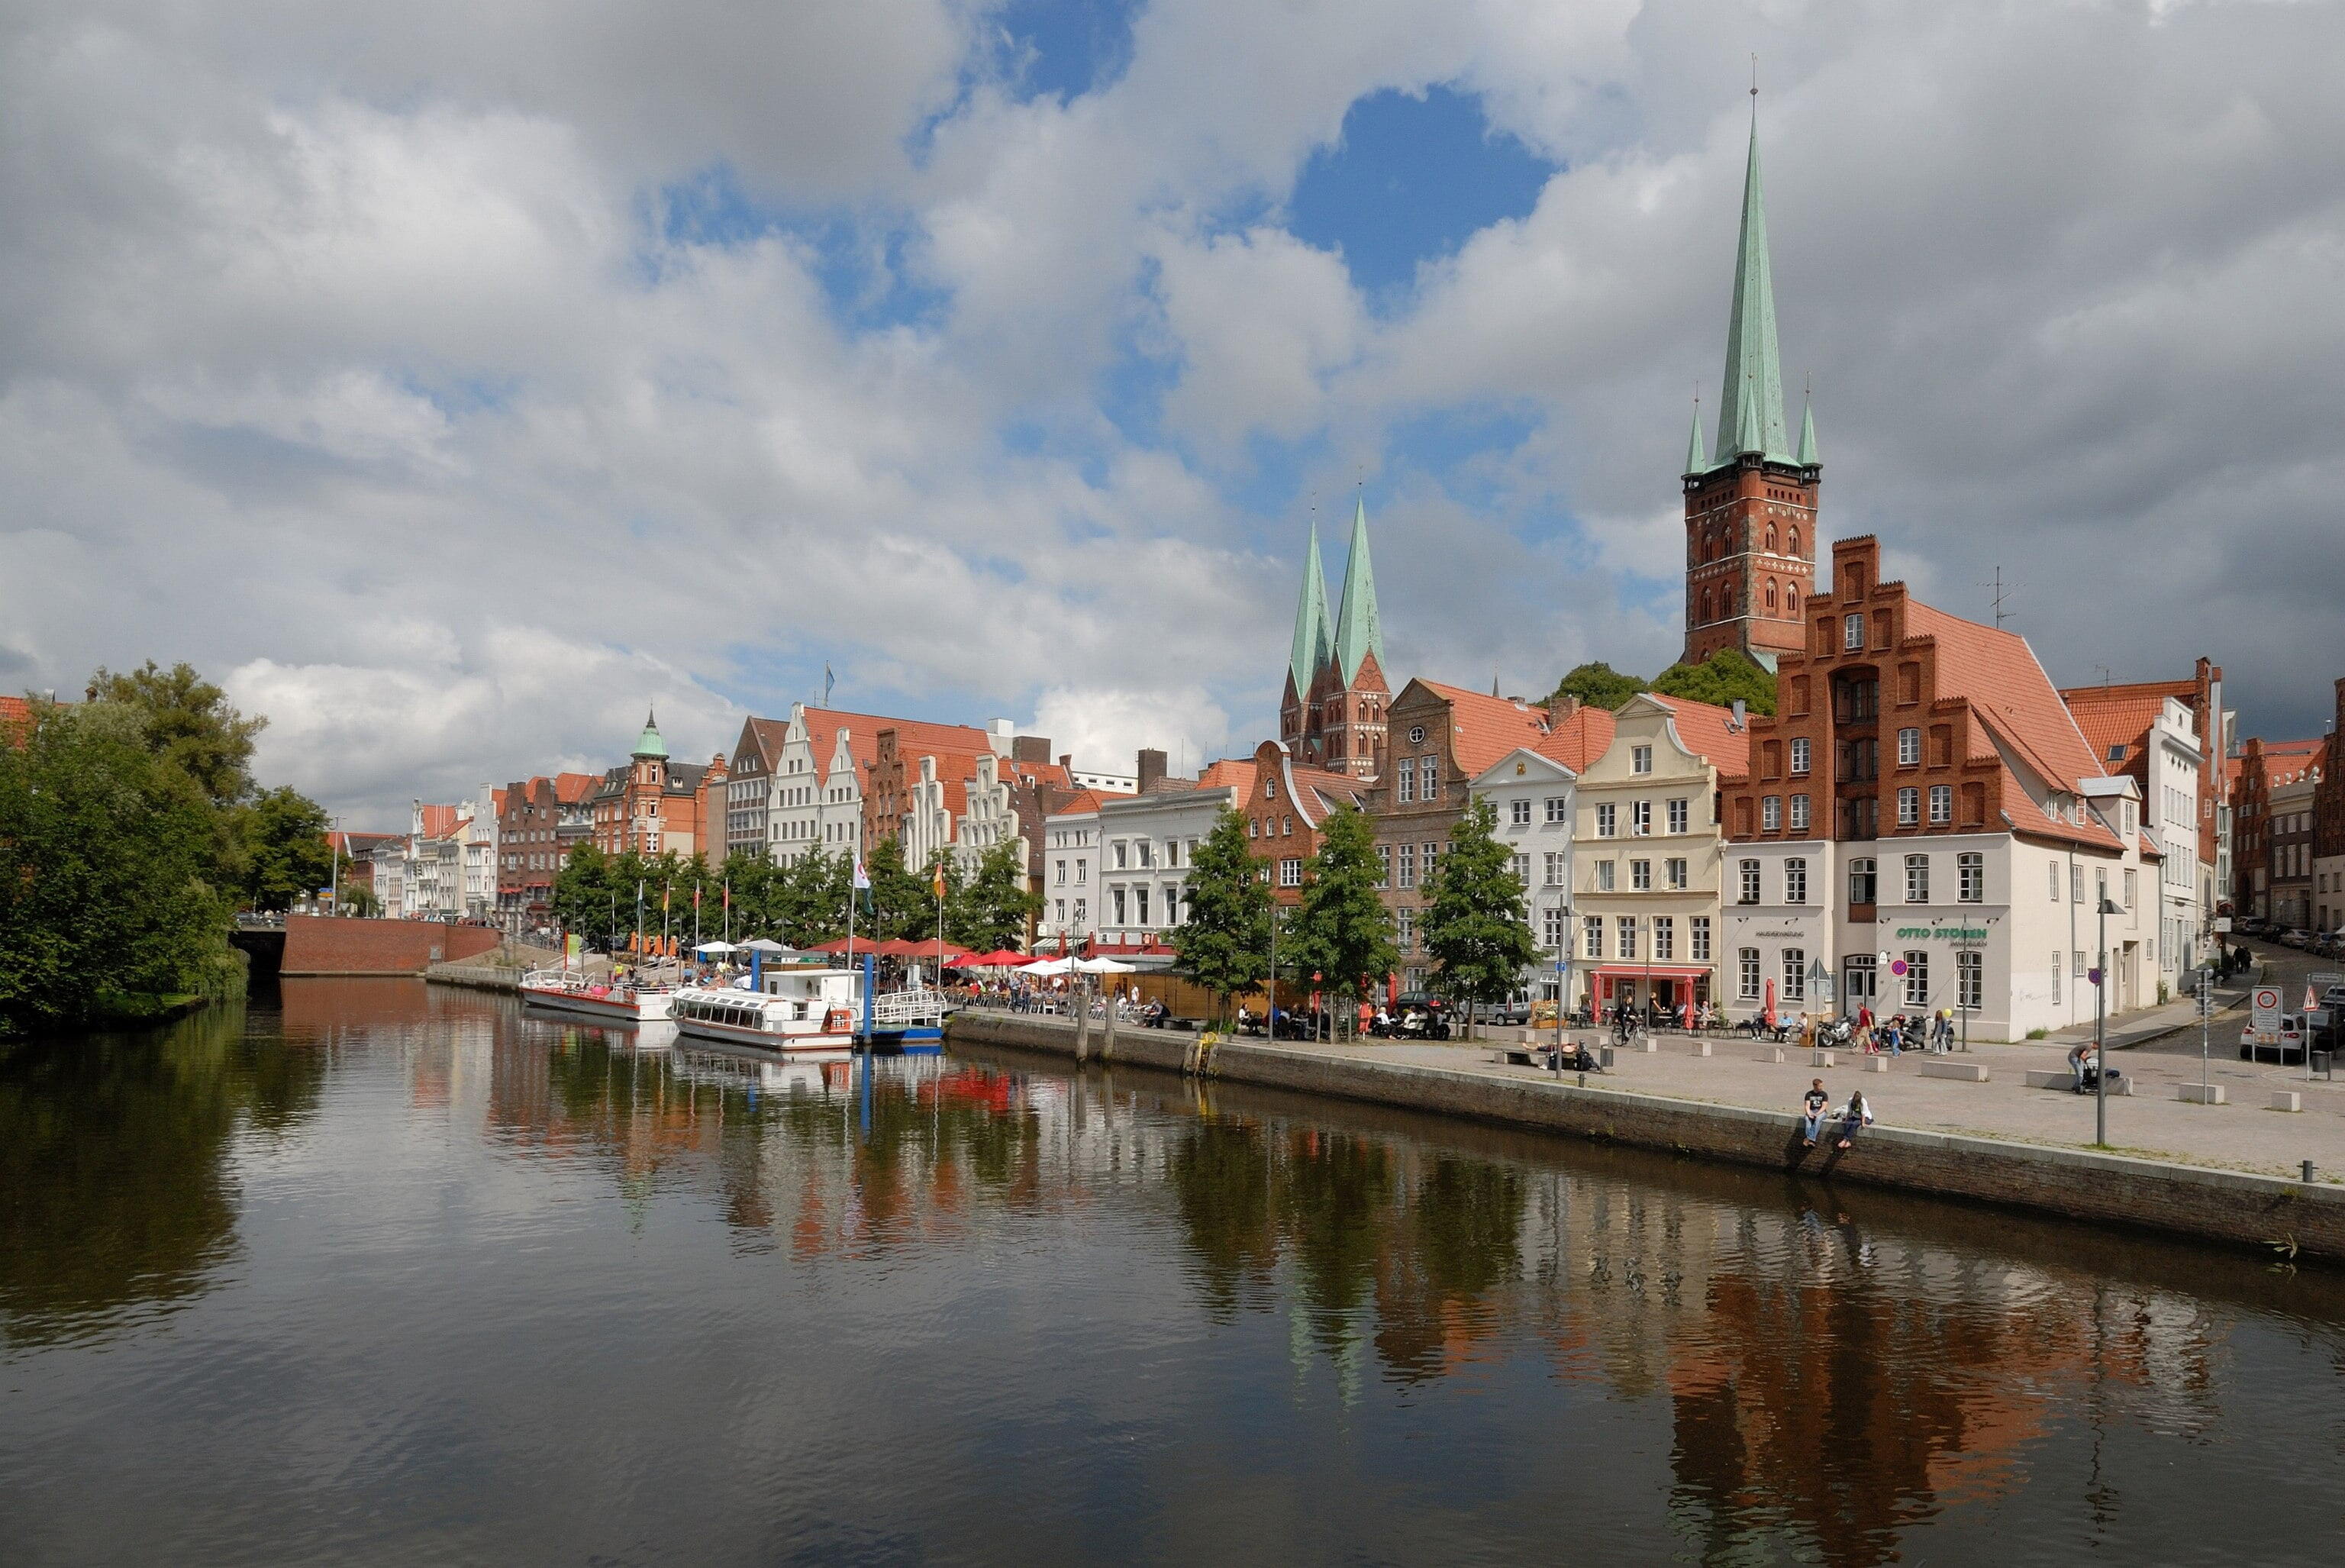 Lubeck - An der Obertrave, listed buildings nr. 6-8 and 11-15, Lübeck, Schleswig-Holstein, Germany